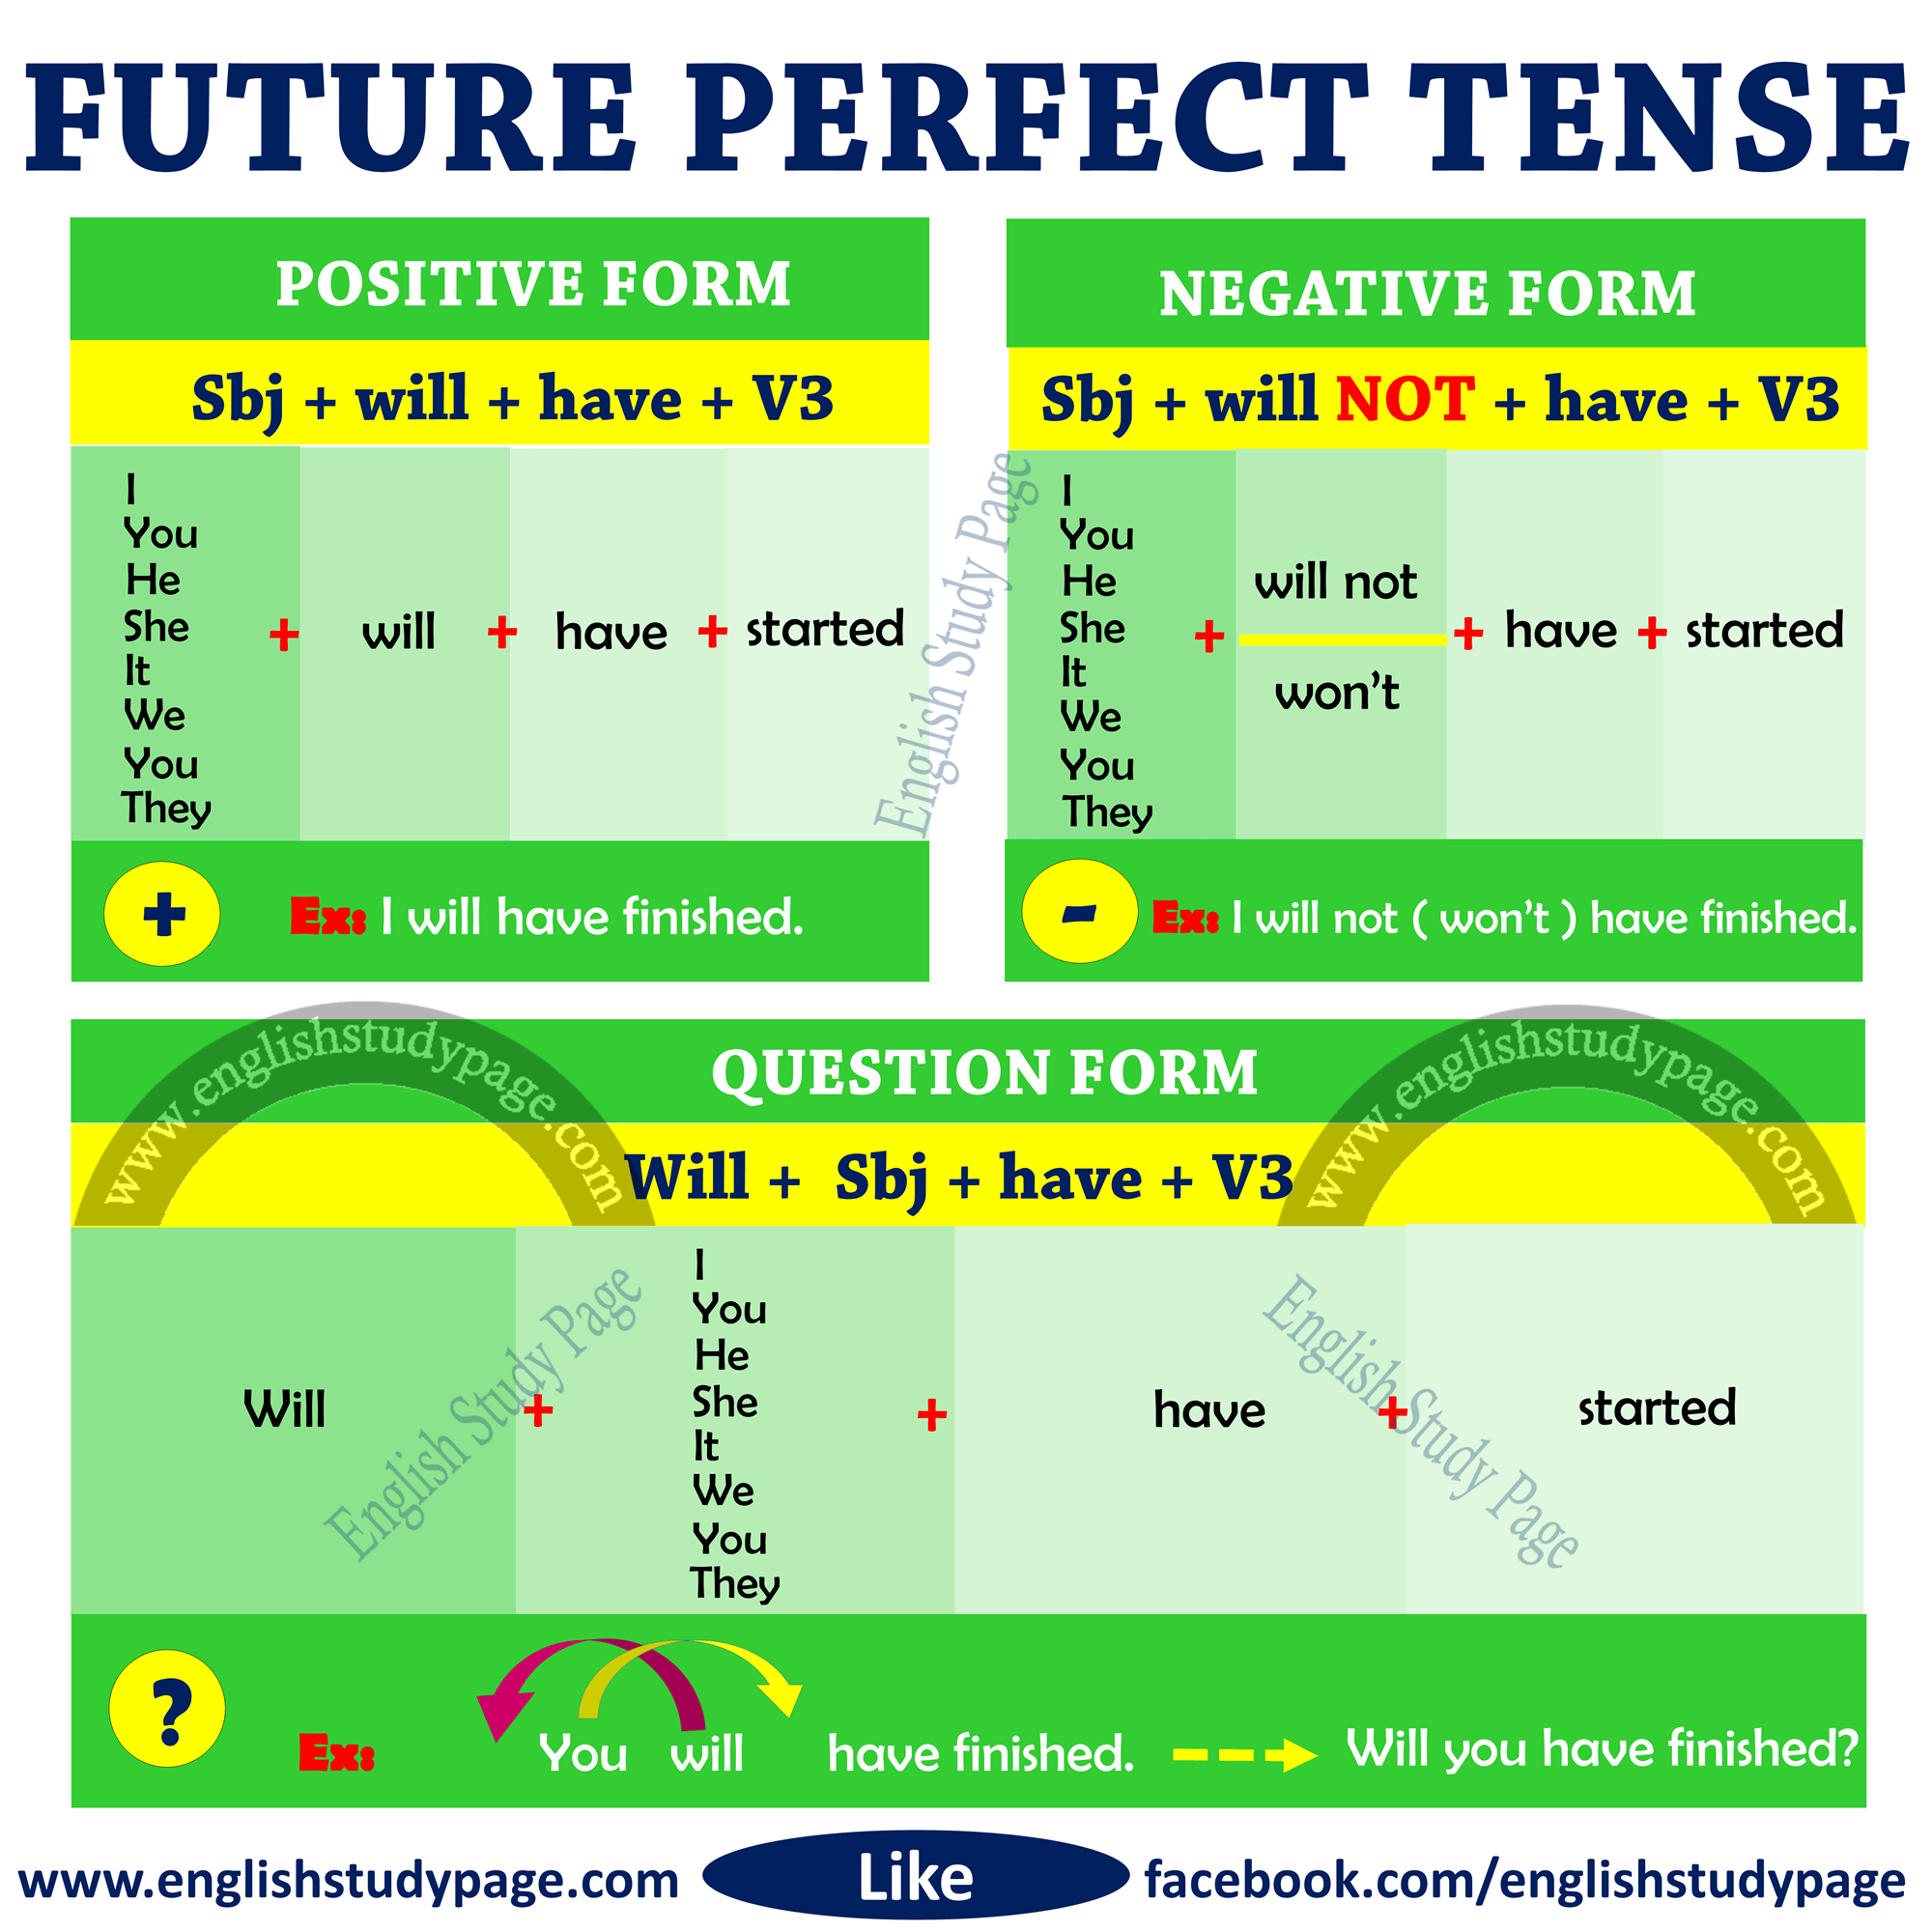 Structure of Future Perfect Tense - English Study Page